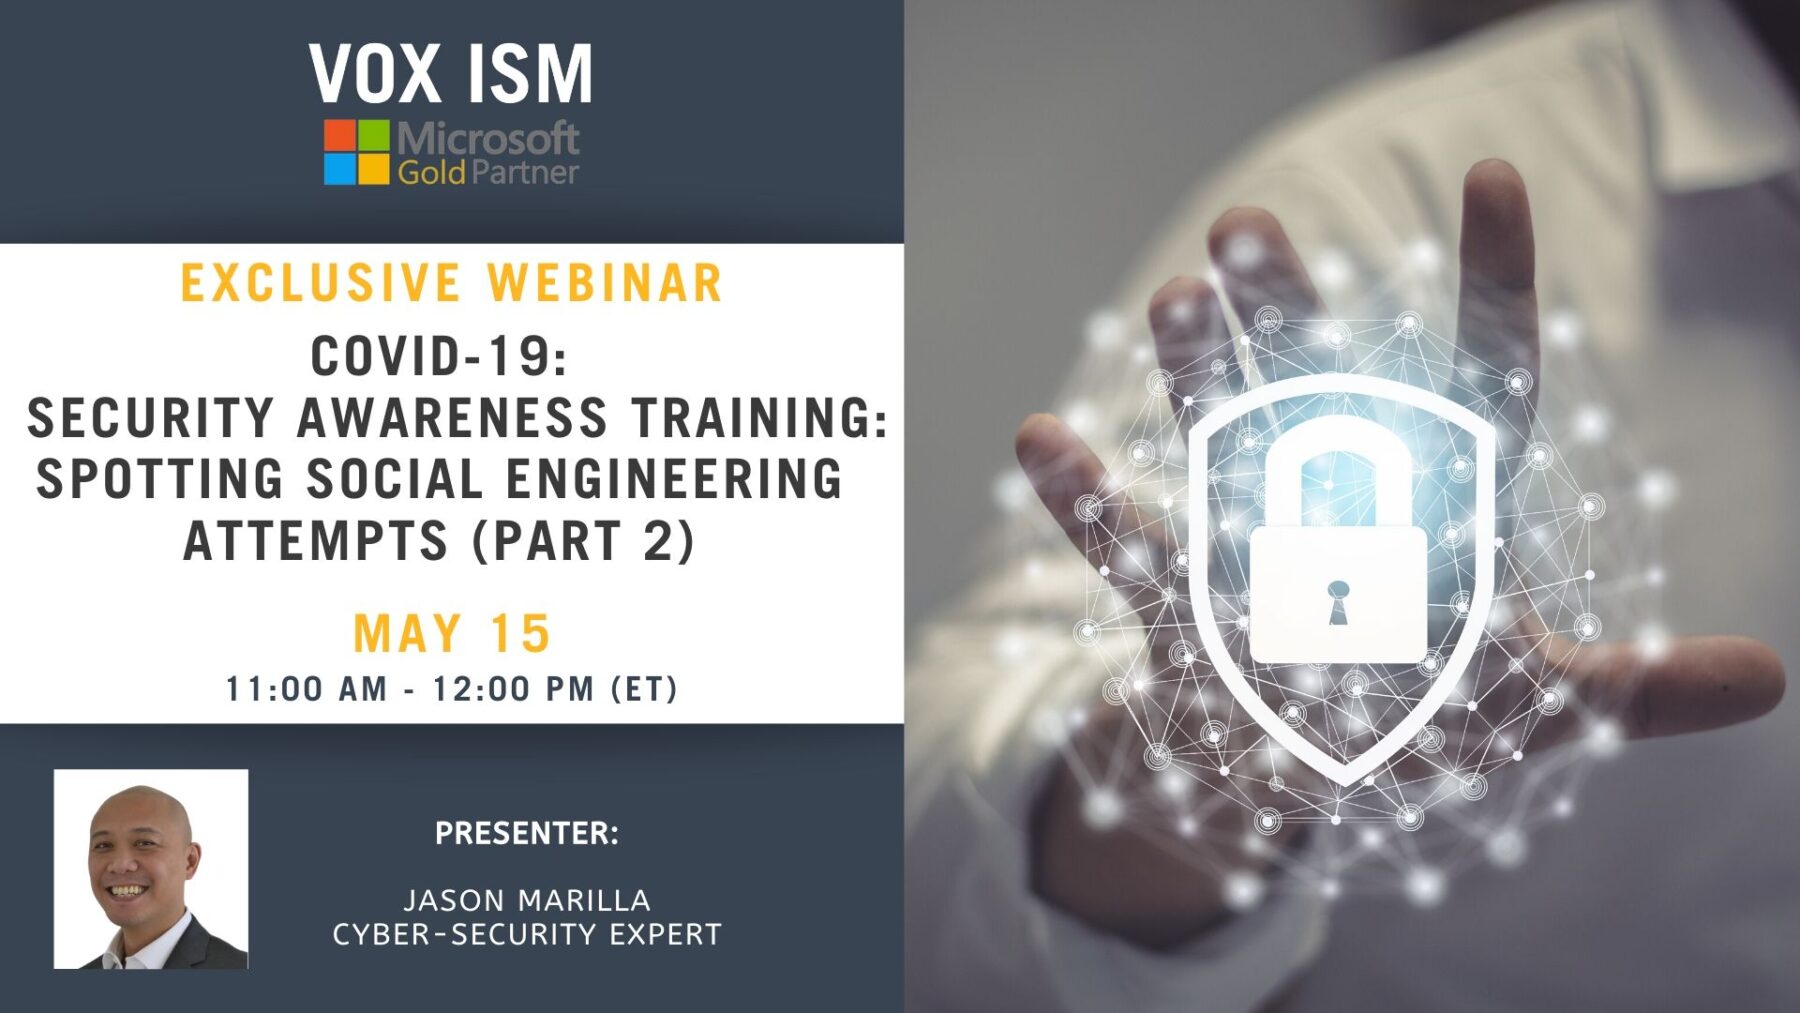 COVID-19: Security awareness training: Spotting social engineering attempts (Part 2) - May 15 - Webinar VOX ISM